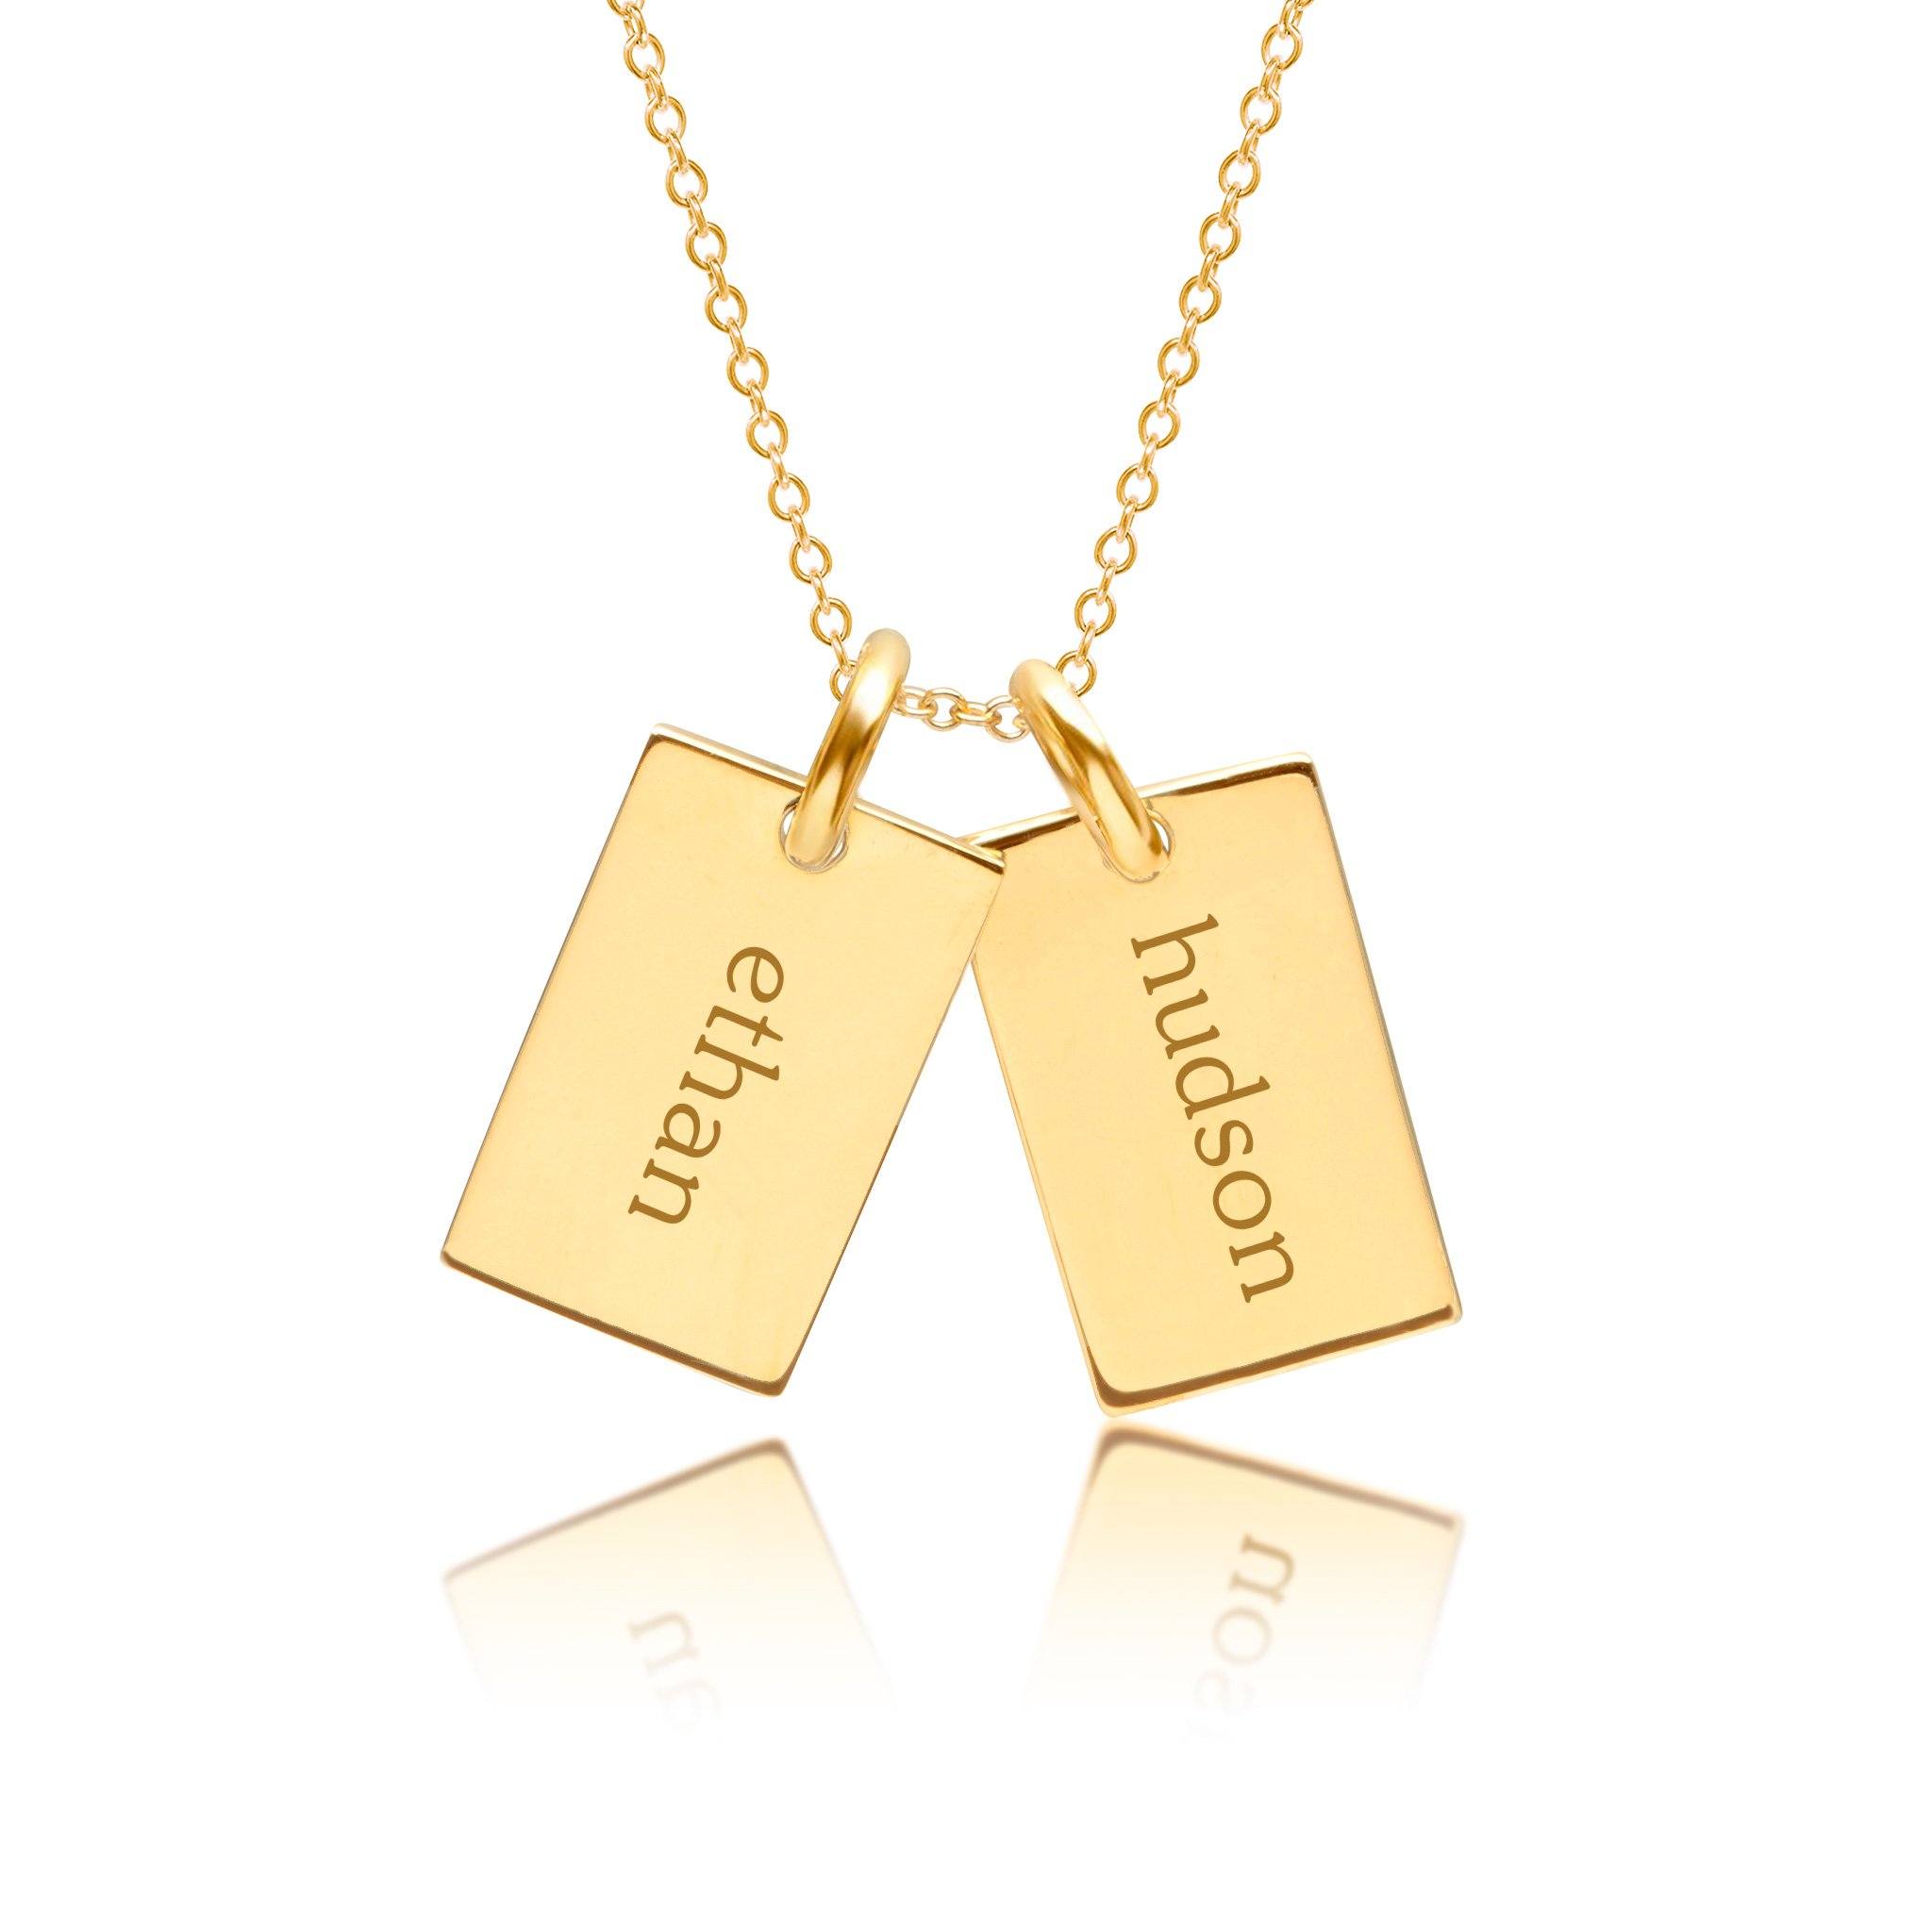 mini gold dog tag necklace